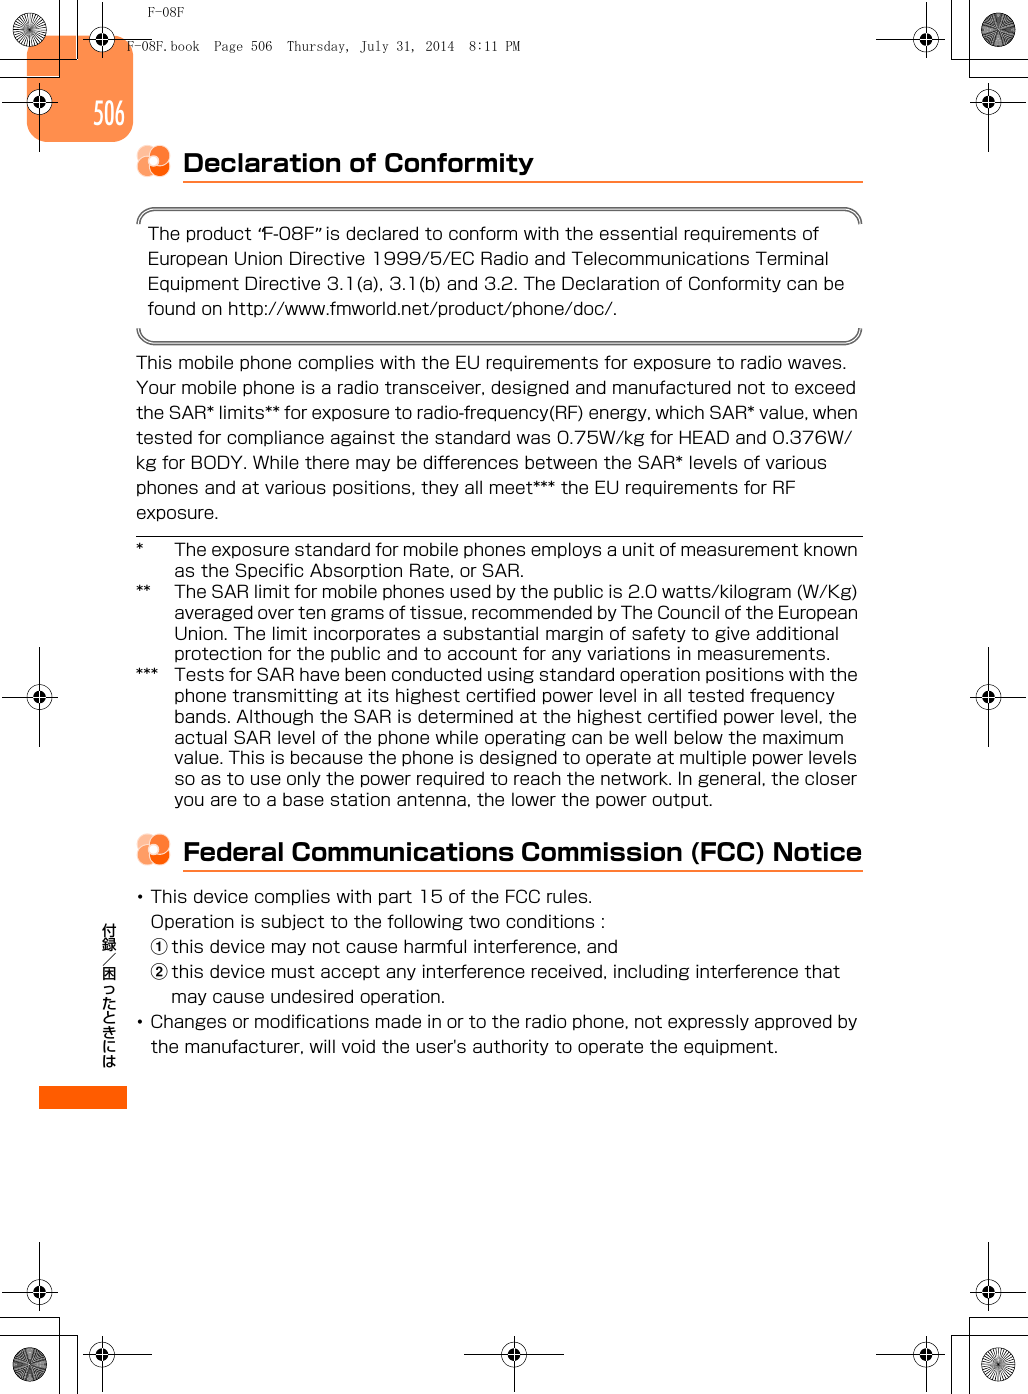 F-08F付録／困ったときには506Declaration of ConformityThe product “F-08F” is declared to conform with the essential requirements of European Union Directive 1999/5/EC Radio and Telecommunications Terminal Equipment Directive 3.1(a), 3.1(b) and 3.2. The Declaration of Conformity can be found on http://www.fmworld.net/product/phone/doc/.This mobile phone complies with the EU requirements for exposure to radio waves.Your mobile phone is a radio transceiver, designed and manufactured not to exceed the SAR* limits** for exposure to radio-frequency(RF) energy, which SAR* value, when tested for compliance against the standard was 0.75W/kg for HEAD and 0.376W/kg for BODY. While there may be differences between the SAR* levels of various phones and at various positions, they all meet*** the EU requirements for RF exposure.* The exposure standard for mobile phones employs a unit of measurement known as the Specific Absorption Rate, or SAR.** The SAR limit for mobile phones used by the public is 2.0 watts/kilogram (W/Kg) averaged over ten grams of tissue, recommended by The Council of the European Union. The limit incorporates a substantial margin of safety to give additional protection for the public and to account for any variations in measurements.*** Tests for SAR have been conducted using standard operation positions with the phone transmitting at its highest certified power level in all tested frequency bands. Although the SAR is determined at the highest certified power level, the actual SAR level of the phone while operating can be well below the maximum value. This is because the phone is designed to operate at multiple power levels so as to use only the power required to reach the network. In general, the closer you are to a base station antenna, the lower the power output.Federal Communications Commission (FCC) Notice･This device complies with part 15 of the FCC rules.Operation is subject to the following two conditions :athis device may not cause harmful interference, and bthis device must accept any interference received, including interference that may cause undesired operation.･Changes or modifications made in or to the radio phone, not expressly approved by the manufacturer, will void the user&apos;s authority to operate the equipment.F-08F.book  Page 506  Thursday, July 31, 2014  8:11 PM